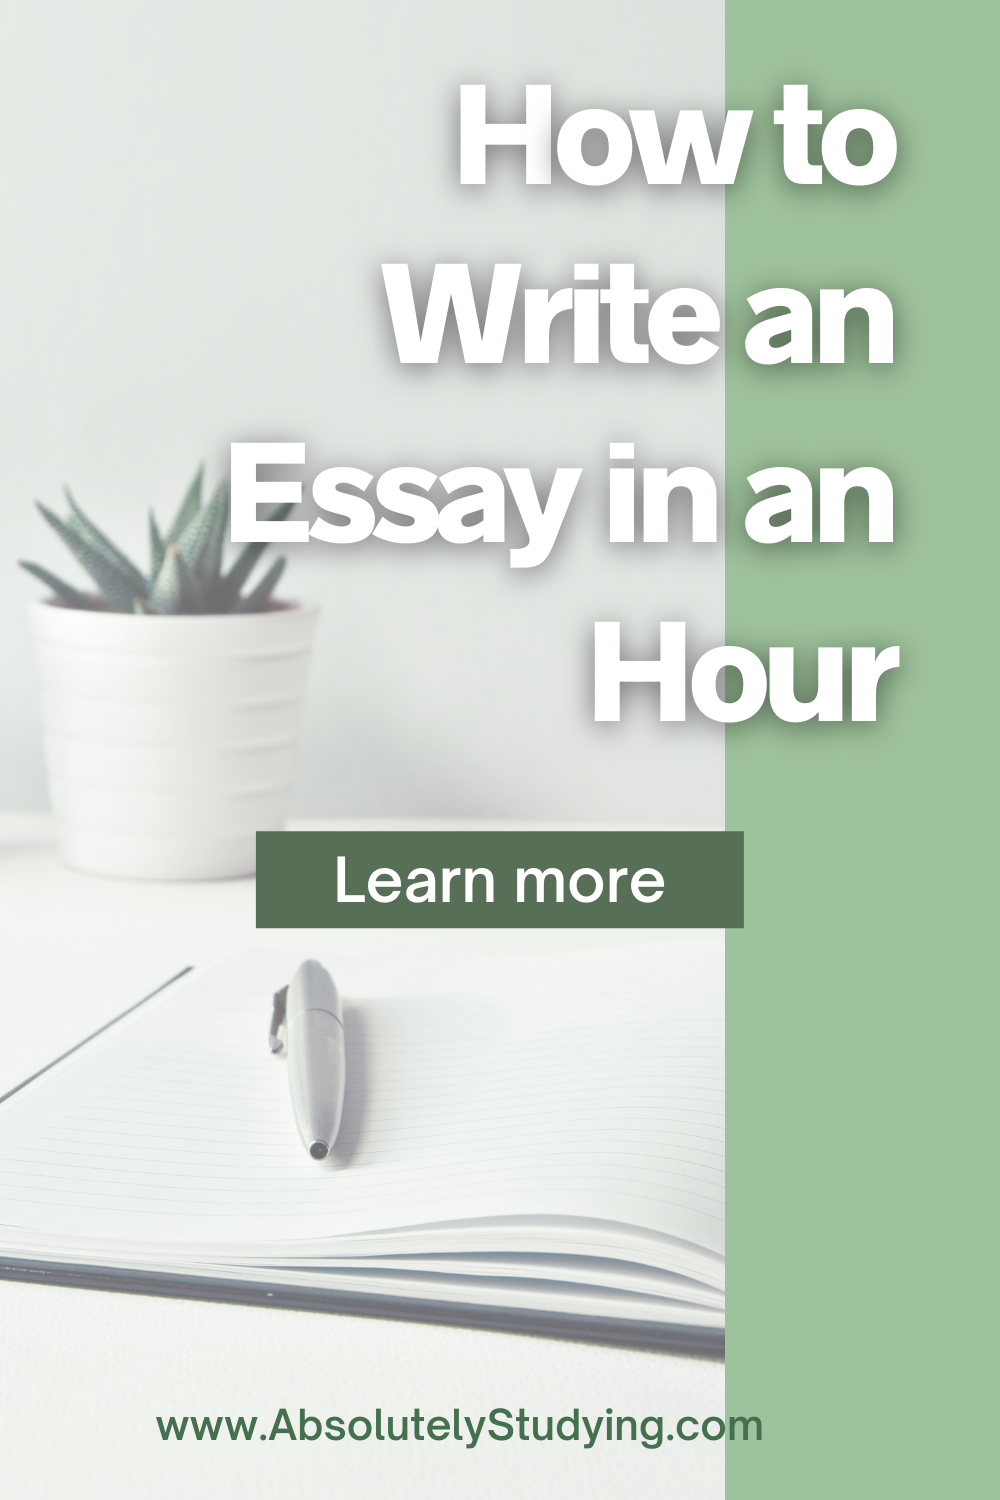 How to write an essay in an hour Pinterest pin